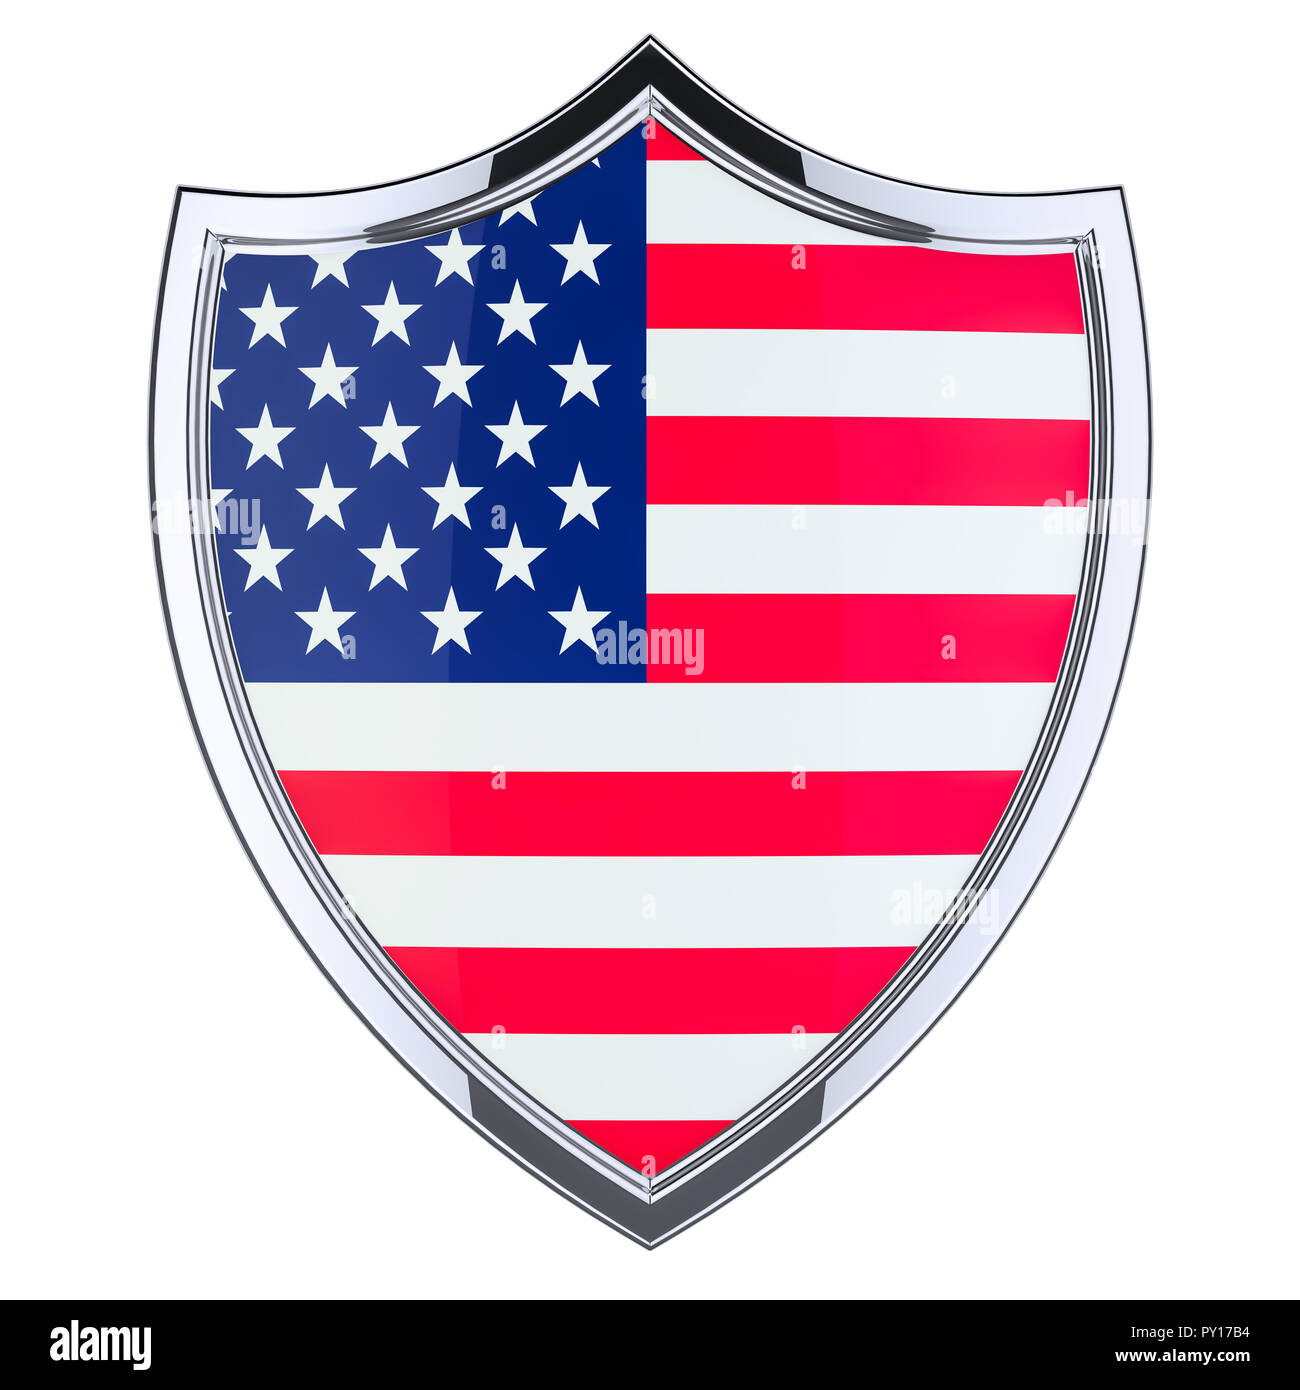 Shield with the United States flag, 3D rendering isolated on white background Stock Photo